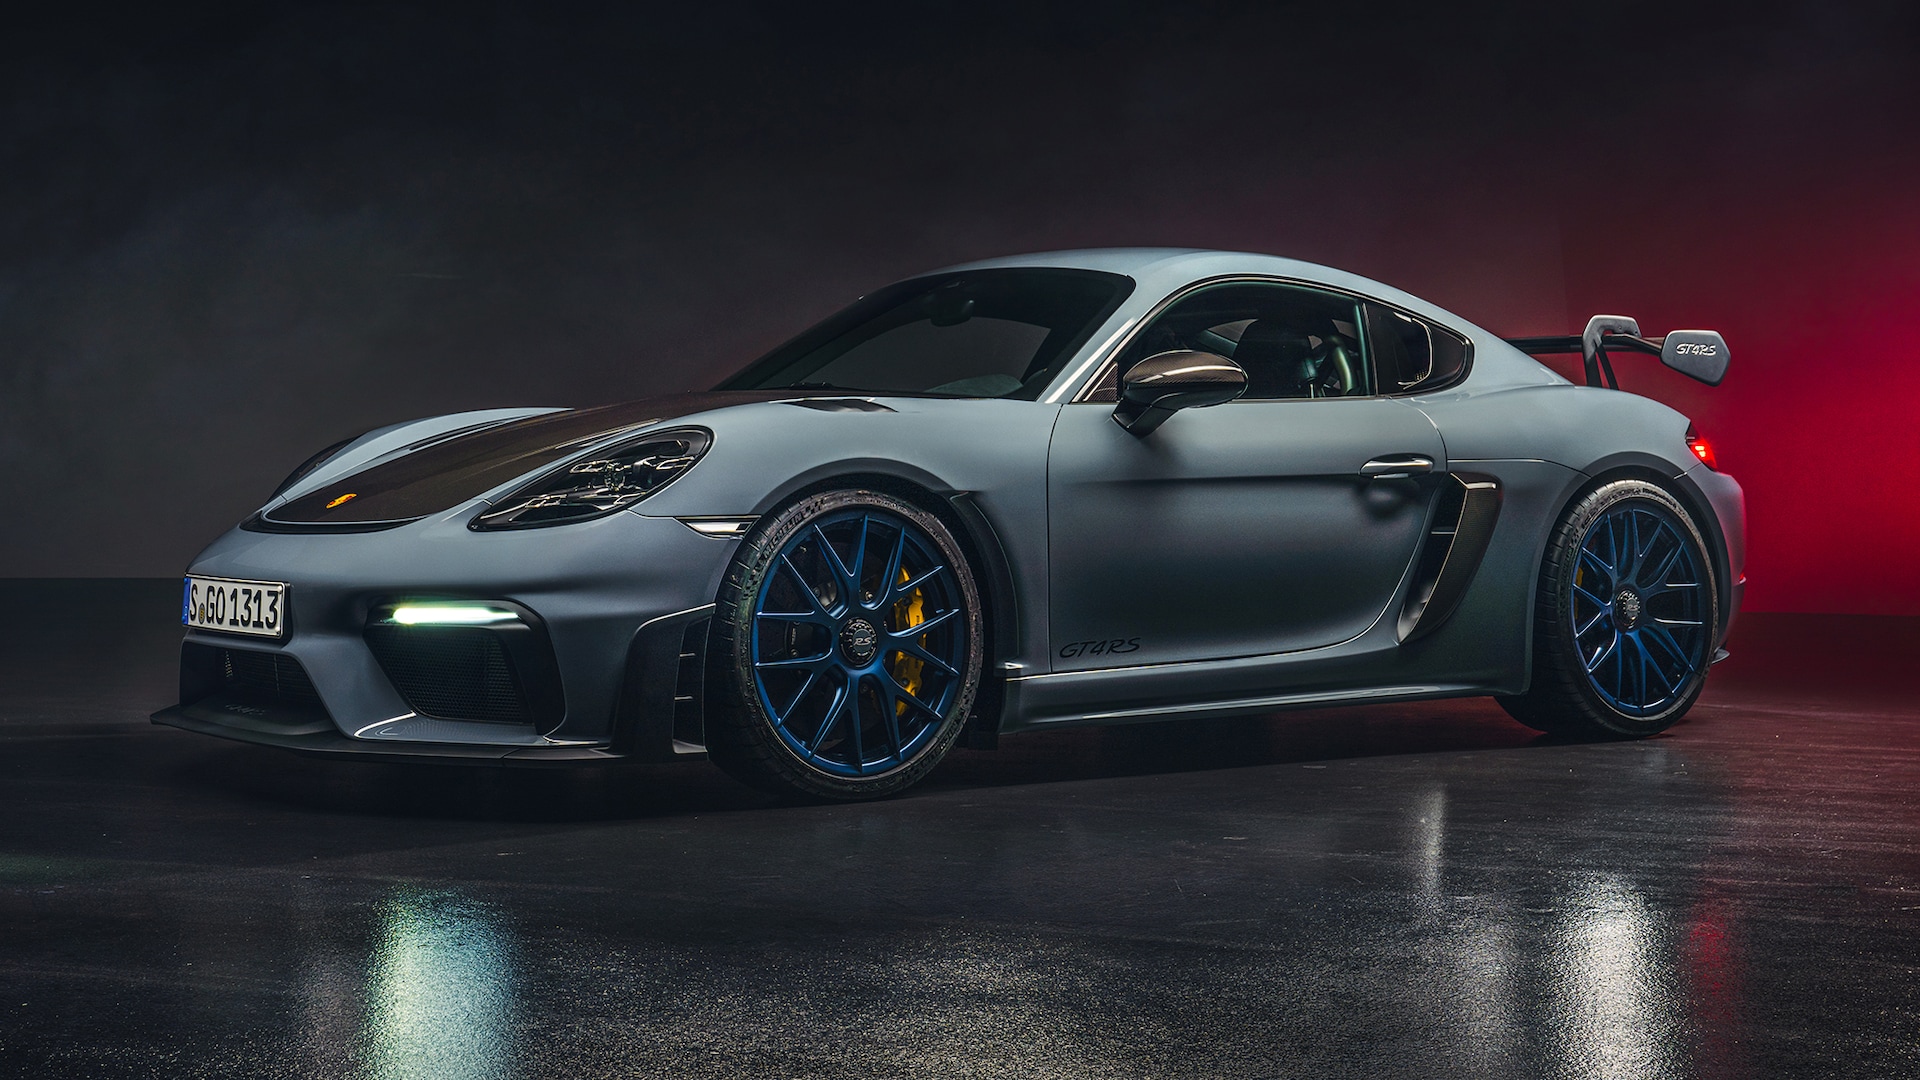 2022 Porsche 718 Cayman Prices, Reviews, and Photos - MotorTrend